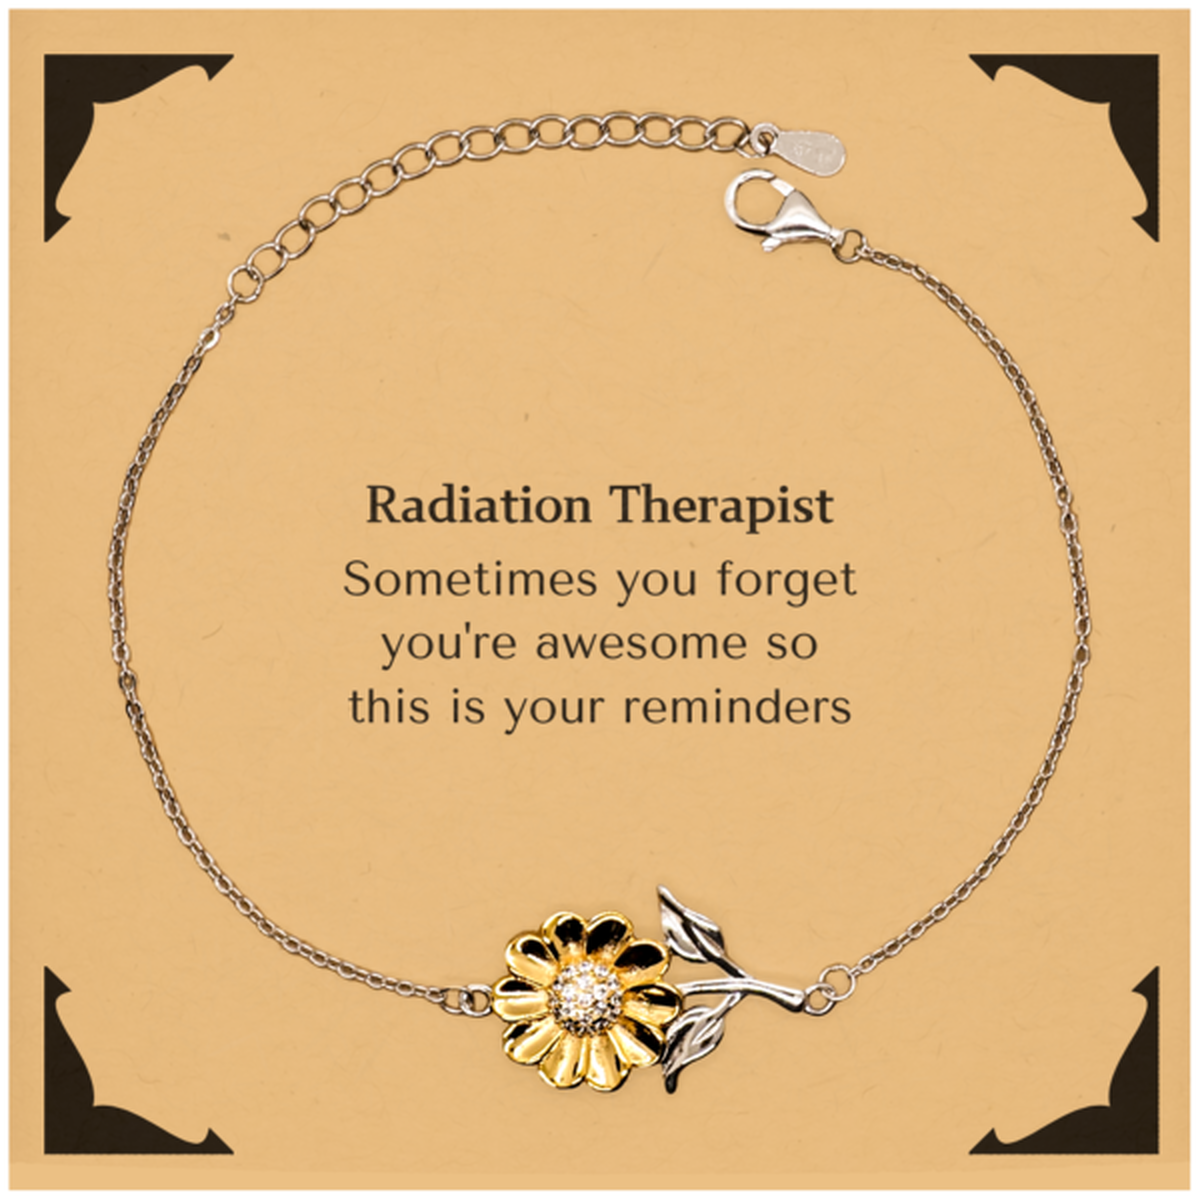 Sentimental Radiation Therapist Sunflower Bracelet, Radiation Therapist Sometimes you forget you're awesome so this is your reminders, Graduation Christmas Birthday Gifts for Radiation Therapist, Men, Women, Coworkers